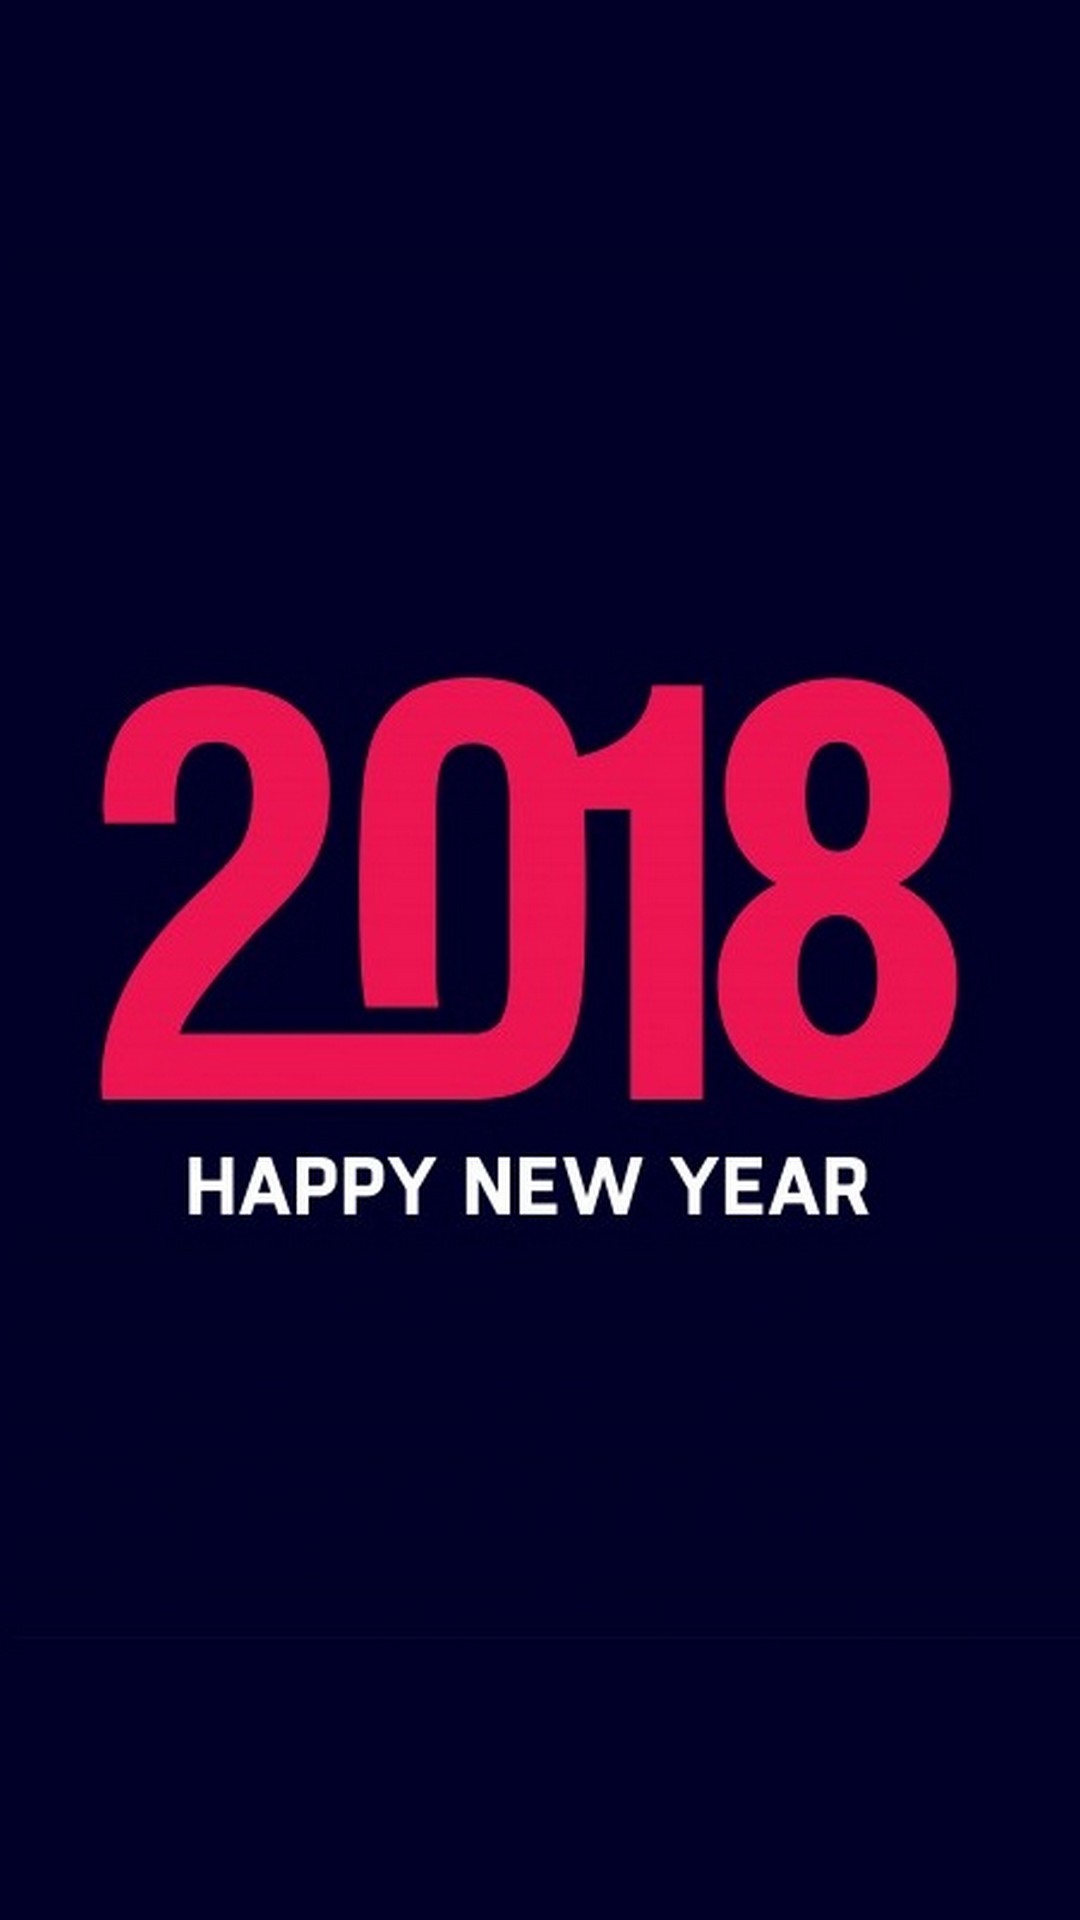 iPhone Wallpaper Happy New Year 2018 Text resolution 1080x1920